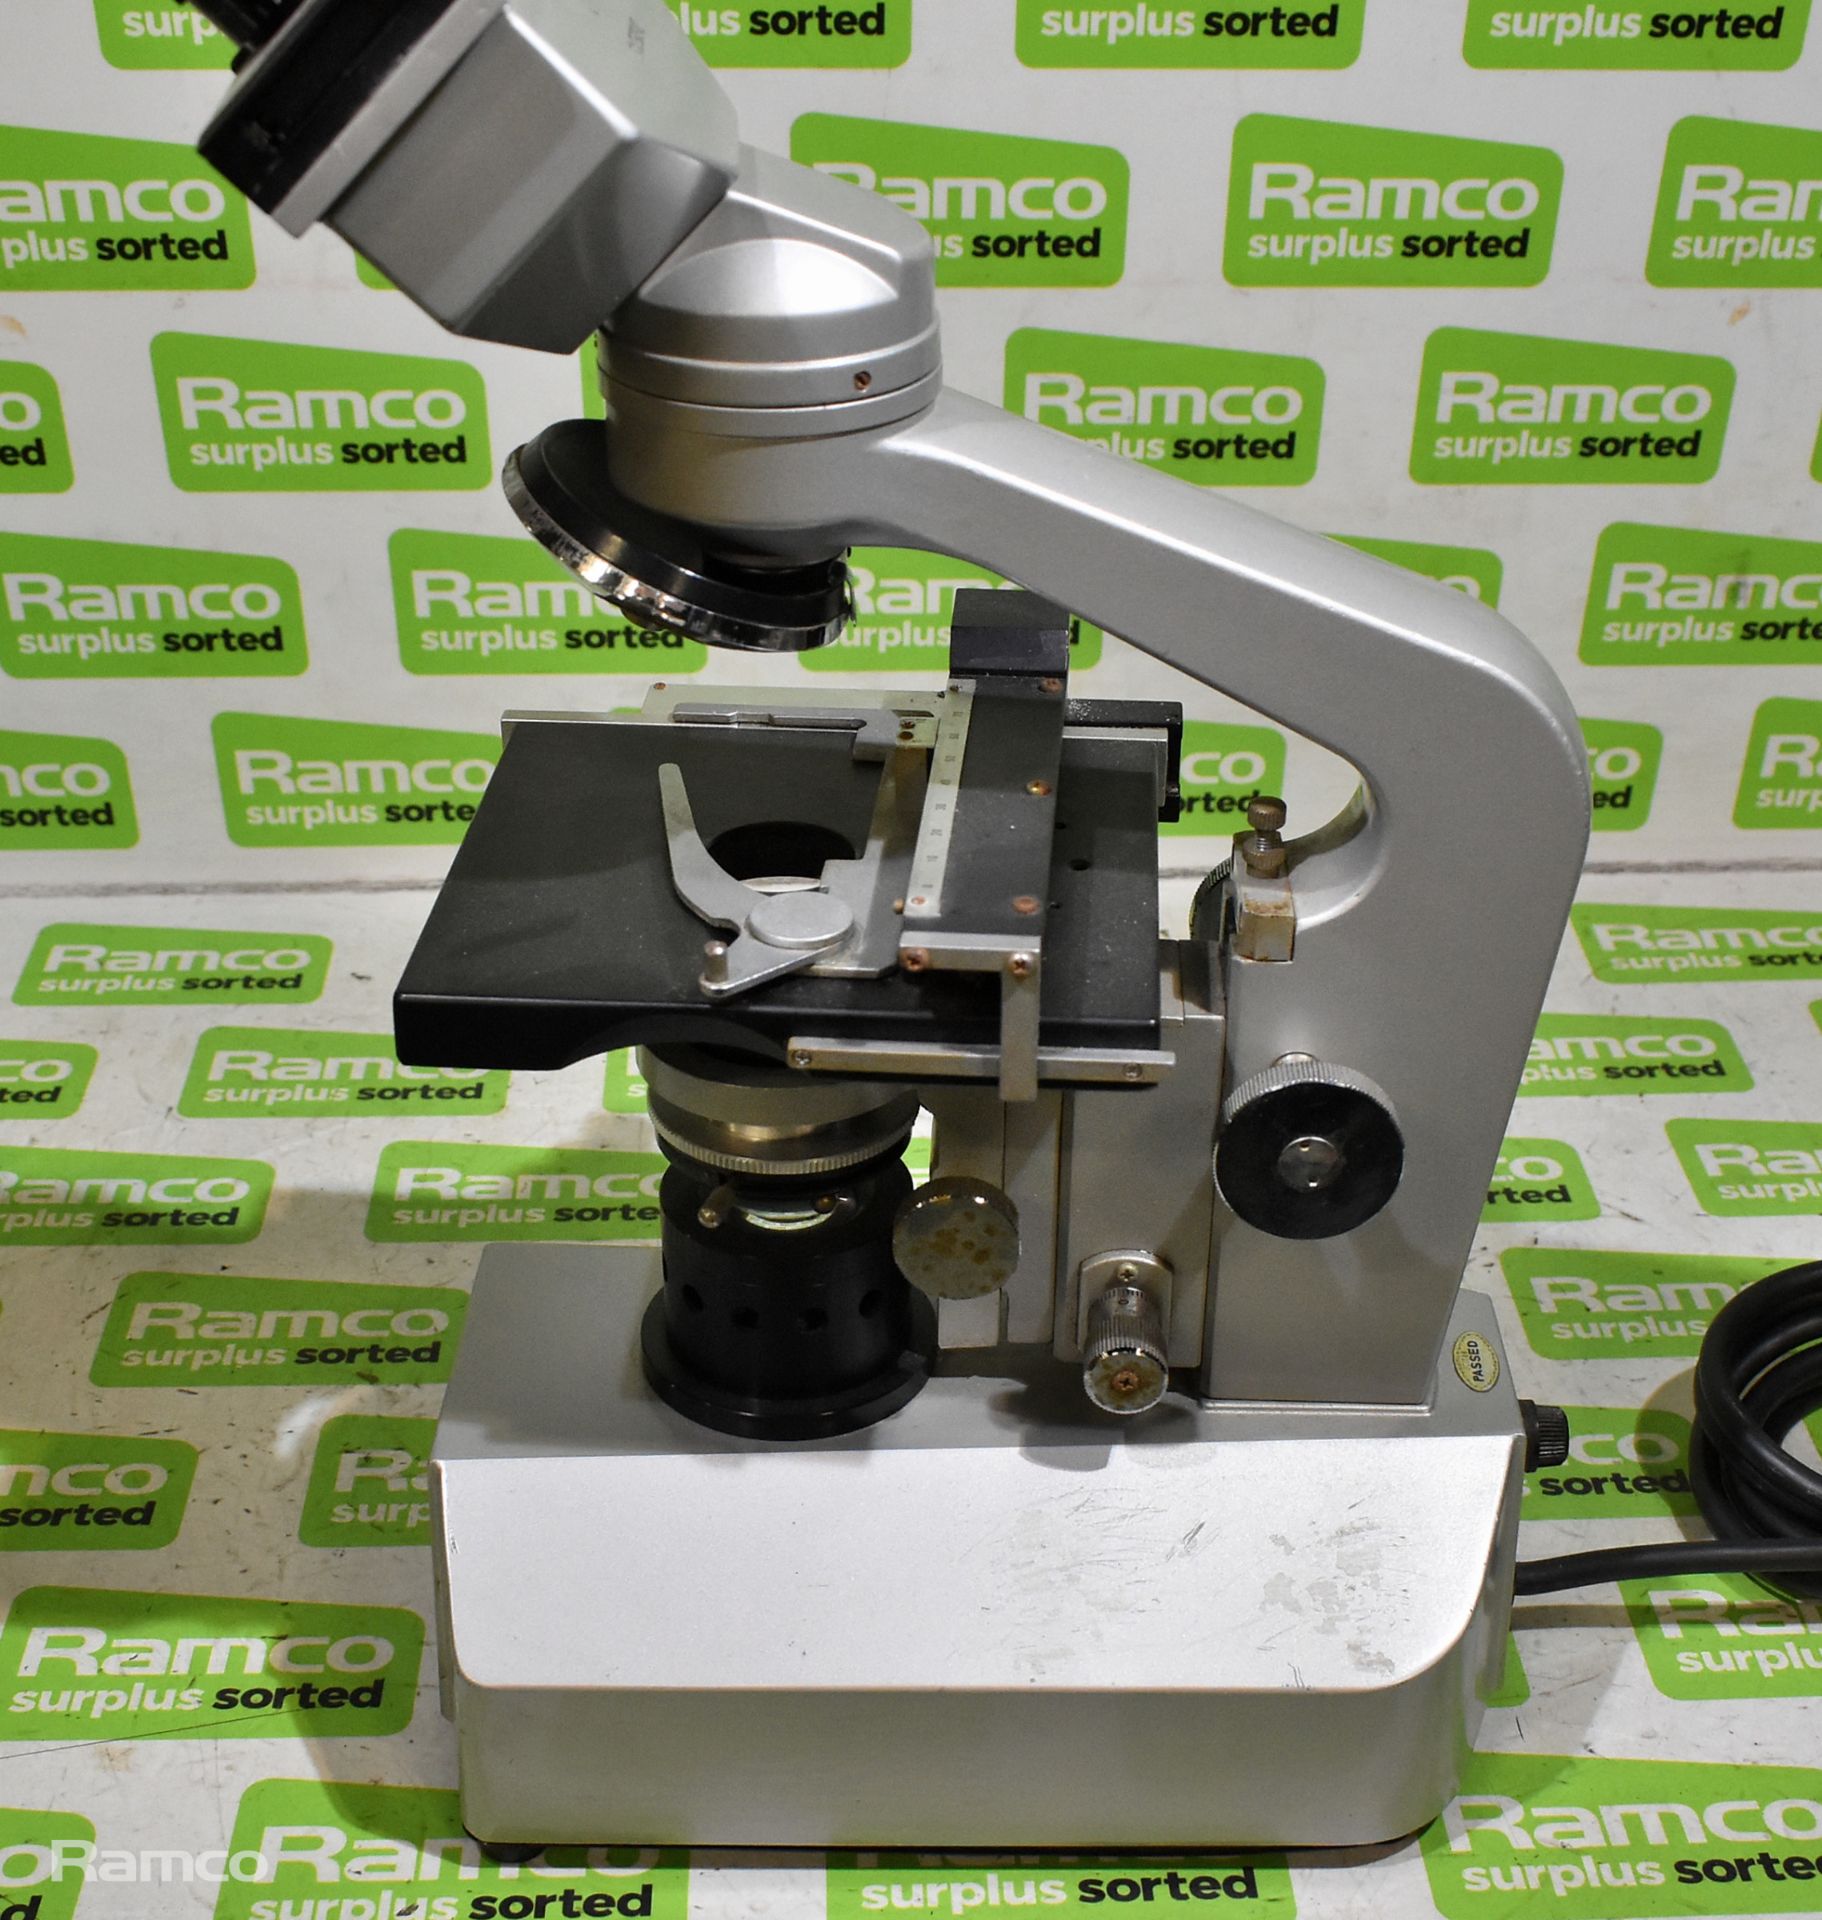 Opax stereomicroscope - Image 5 of 6